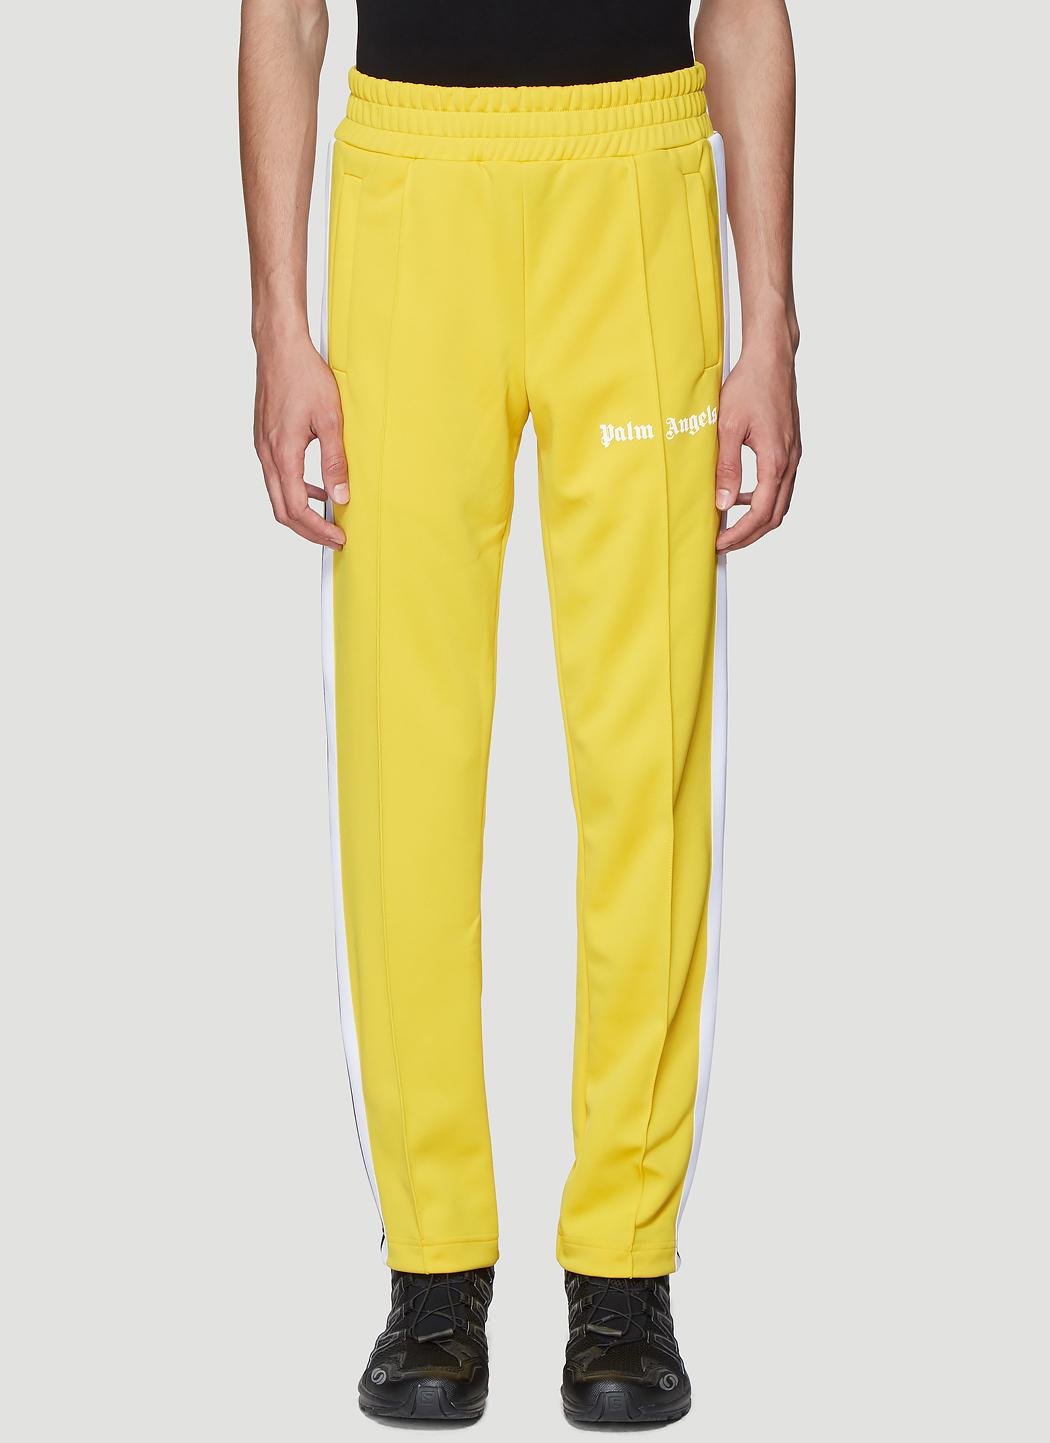 Palm Angels Synthetic Track Pants In Yellow for Men - Lyst